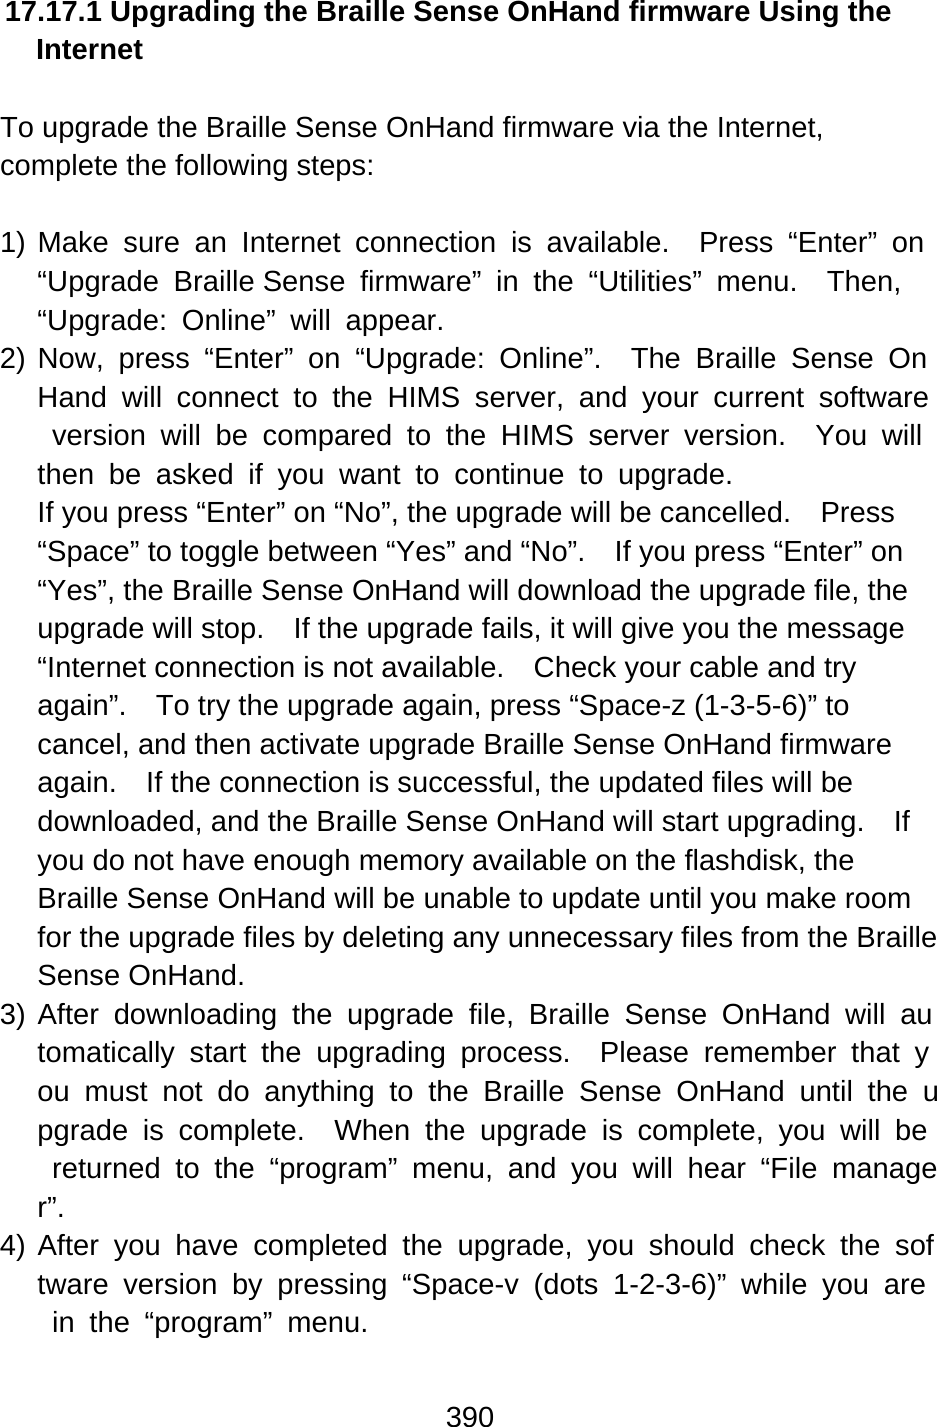 390  17.17.1 Upgrading the Braille Sense OnHand firmware Using the Internet  To upgrade the Braille Sense OnHand firmware via the Internet, complete the following steps:  1) Make sure an Internet connection is available.  Press “Enter” on “Upgrade Braille Sense firmware” in the “Utilities” menu.  Then, “Upgrade: Online” will appear. 2) Now, press “Enter” on “Upgrade: Online”.  The Braille Sense OnHand will connect to the HIMS server, and your current software version will be compared to the HIMS server version.  You will then be asked if you want to continue to upgrade. If you press “Enter” on “No”, the upgrade will be cancelled.    Press “Space” to toggle between “Yes” and “No”.    If you press “Enter” on “Yes”, the Braille Sense OnHand will download the upgrade file, the upgrade will stop.    If the upgrade fails, it will give you the message “Internet connection is not available.    Check your cable and try again”.    To try the upgrade again, press “Space-z (1-3-5-6)” to cancel, and then activate upgrade Braille Sense OnHand firmware again.    If the connection is successful, the updated files will be downloaded, and the Braille Sense OnHand will start upgrading.    If you do not have enough memory available on the flashdisk, the Braille Sense OnHand will be unable to update until you make room for the upgrade files by deleting any unnecessary files from the Braille Sense OnHand. 3) After downloading the upgrade file, Braille Sense OnHand will automatically start the upgrading process.  Please remember that you must not do anything to the Braille Sense OnHand until the upgrade is complete.  When the upgrade is complete, you will be returned to the “program” menu, and you will hear “File manager”. 4) After you have completed the upgrade, you should check the software version by pressing “Space-v (dots 1-2-3-6)” while you are in the “program” menu.  